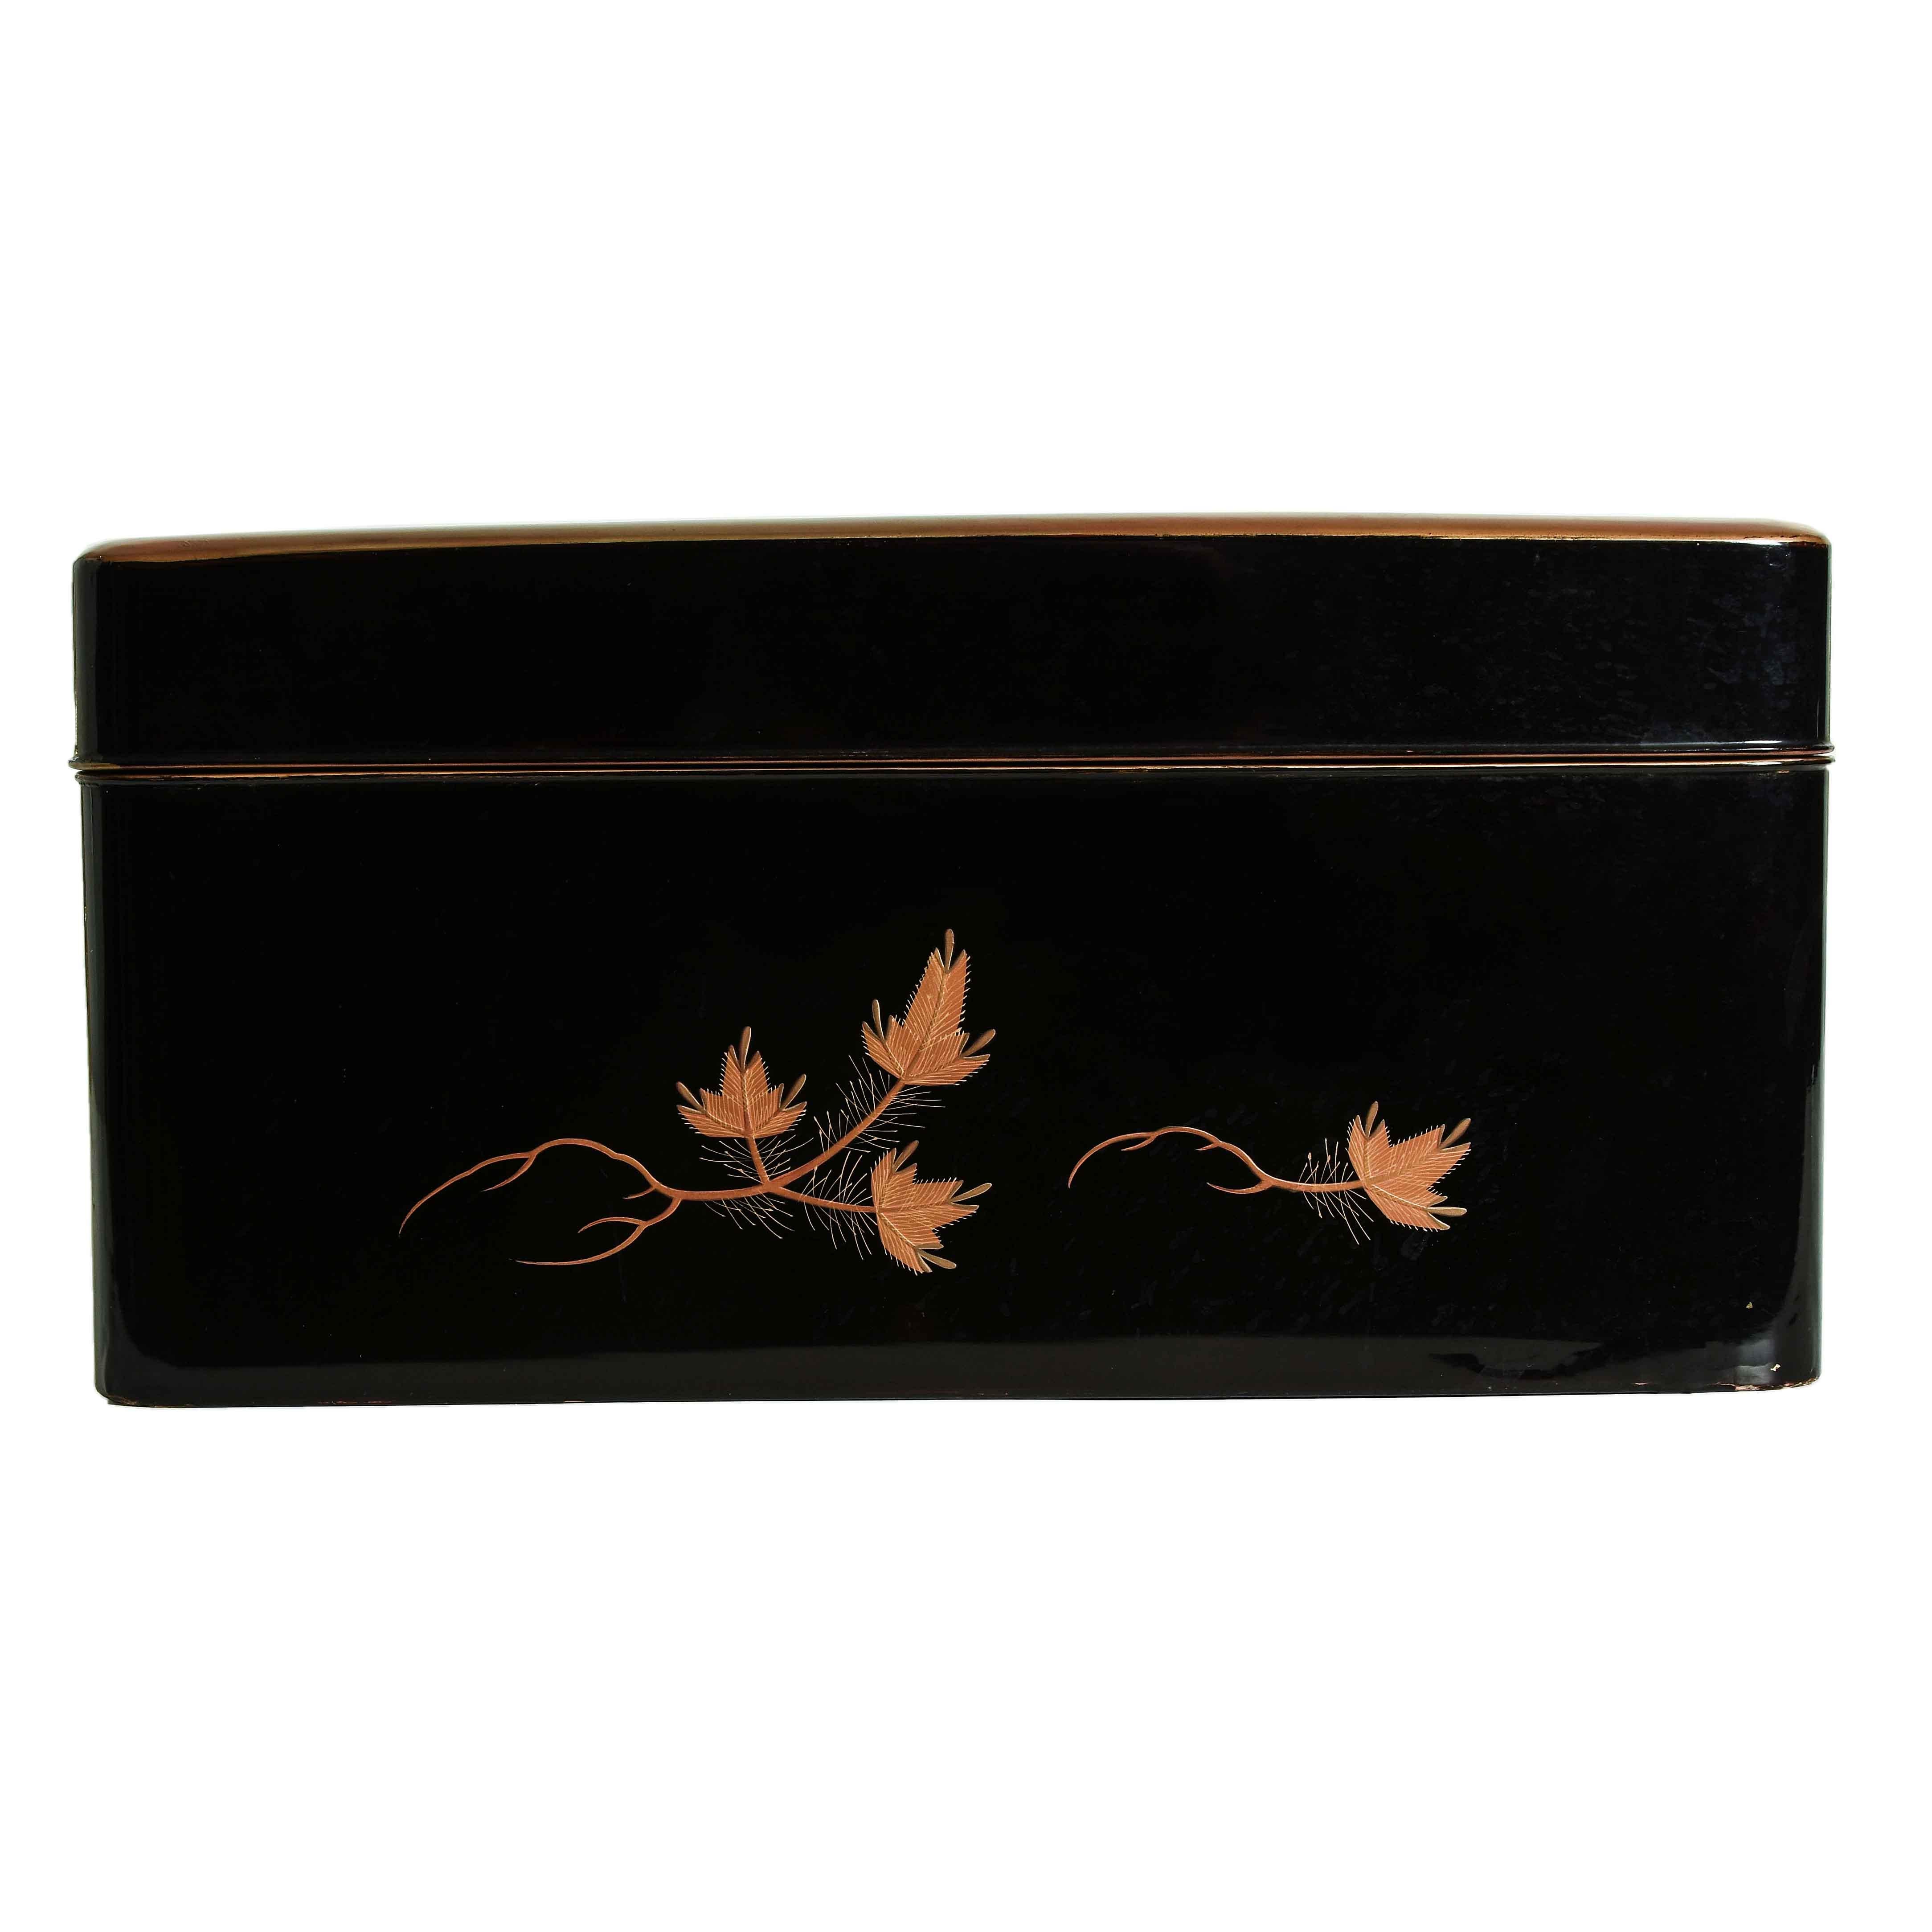 A Japanese black lacquer document box decorated with a motif of five flying cranes over a landscape with conifers, grasses and a rushing brook, all exquisitely rendered in gold, silver and bronze maki e. The conifer motif is carried around the sides